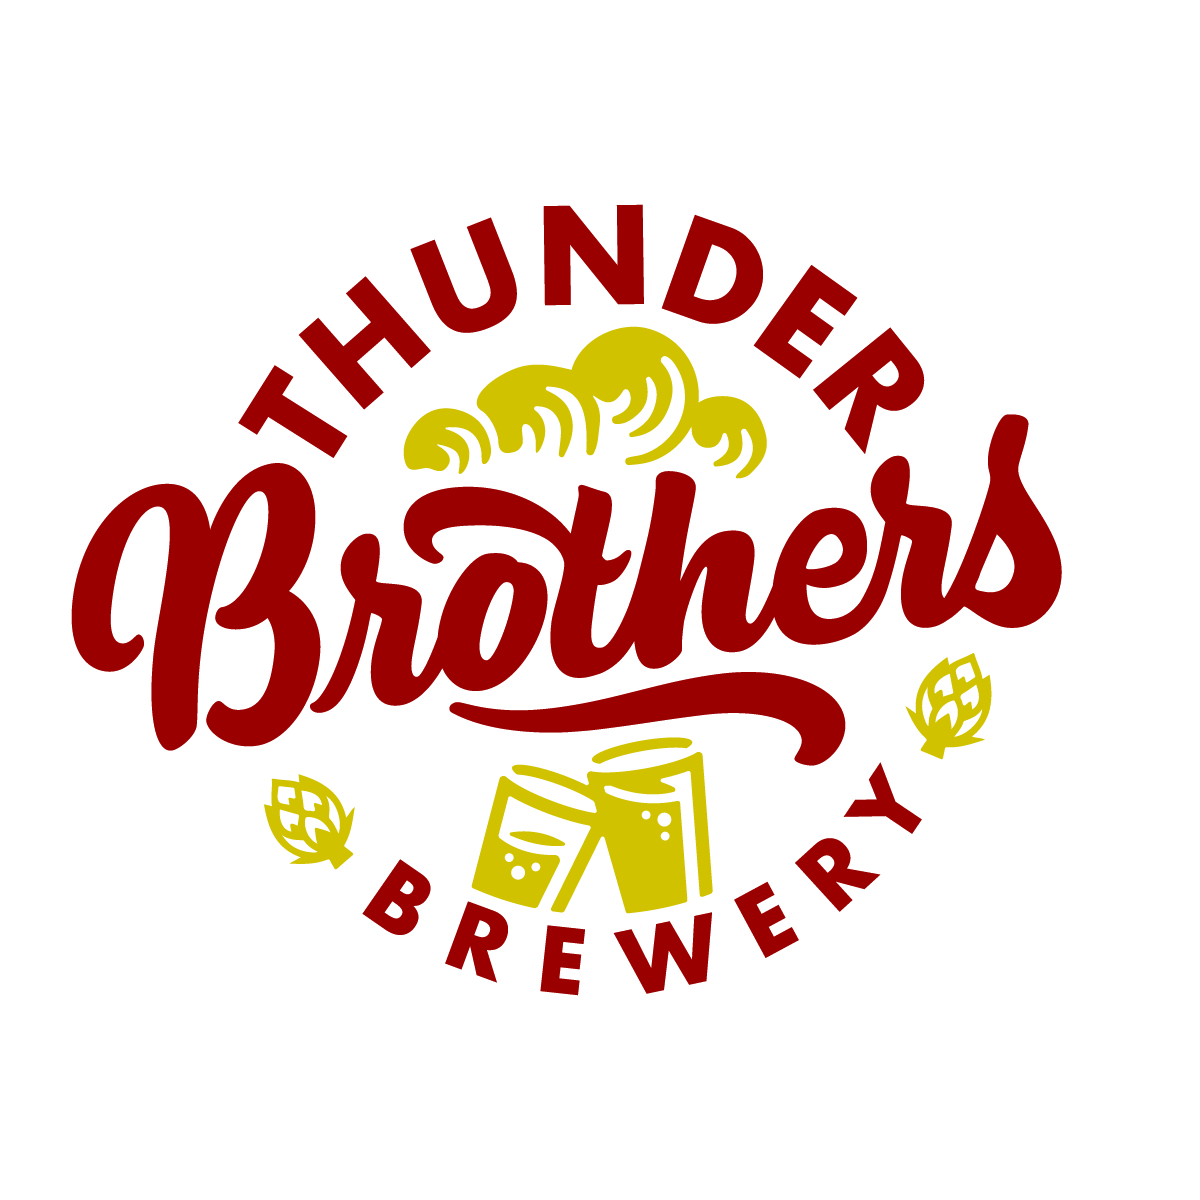 https://www.mncraftbrew.org/wp-content/uploads/2022/04/Thunder_Brothers_final-011.jpg